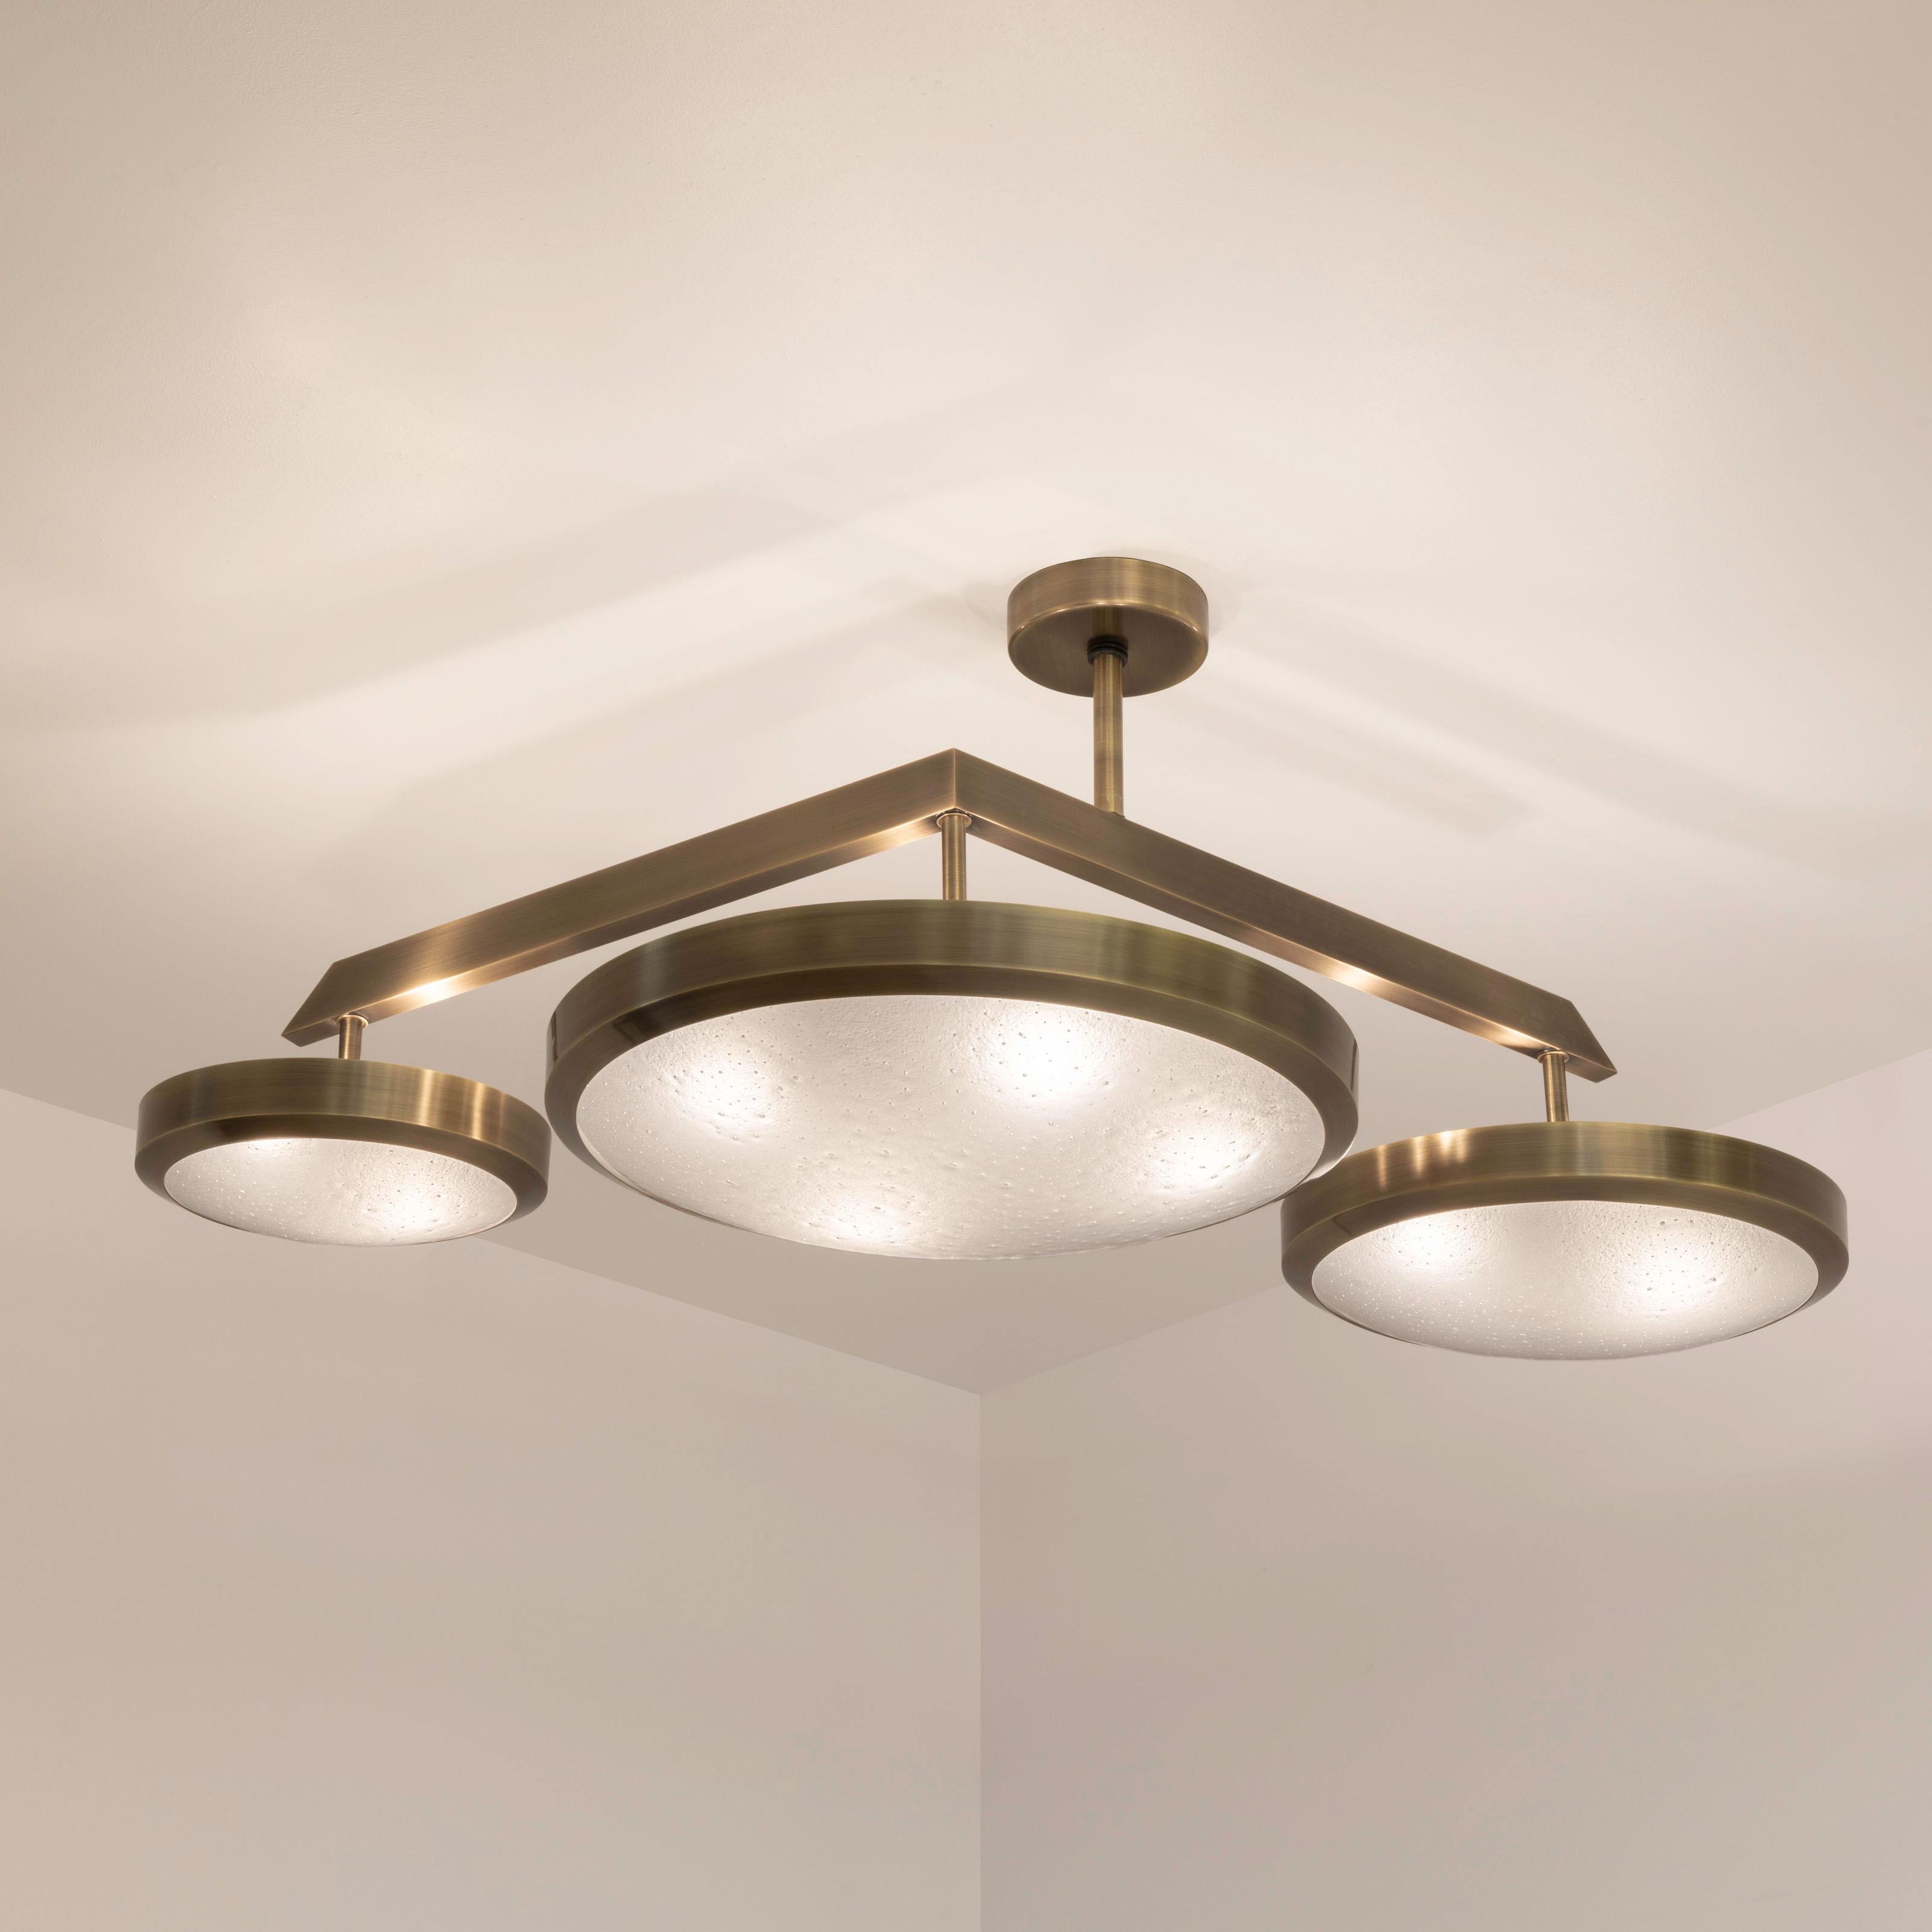 Zeta Ceiling Light by Gaspare Asaro - Polished Nickel Finish For Sale 1